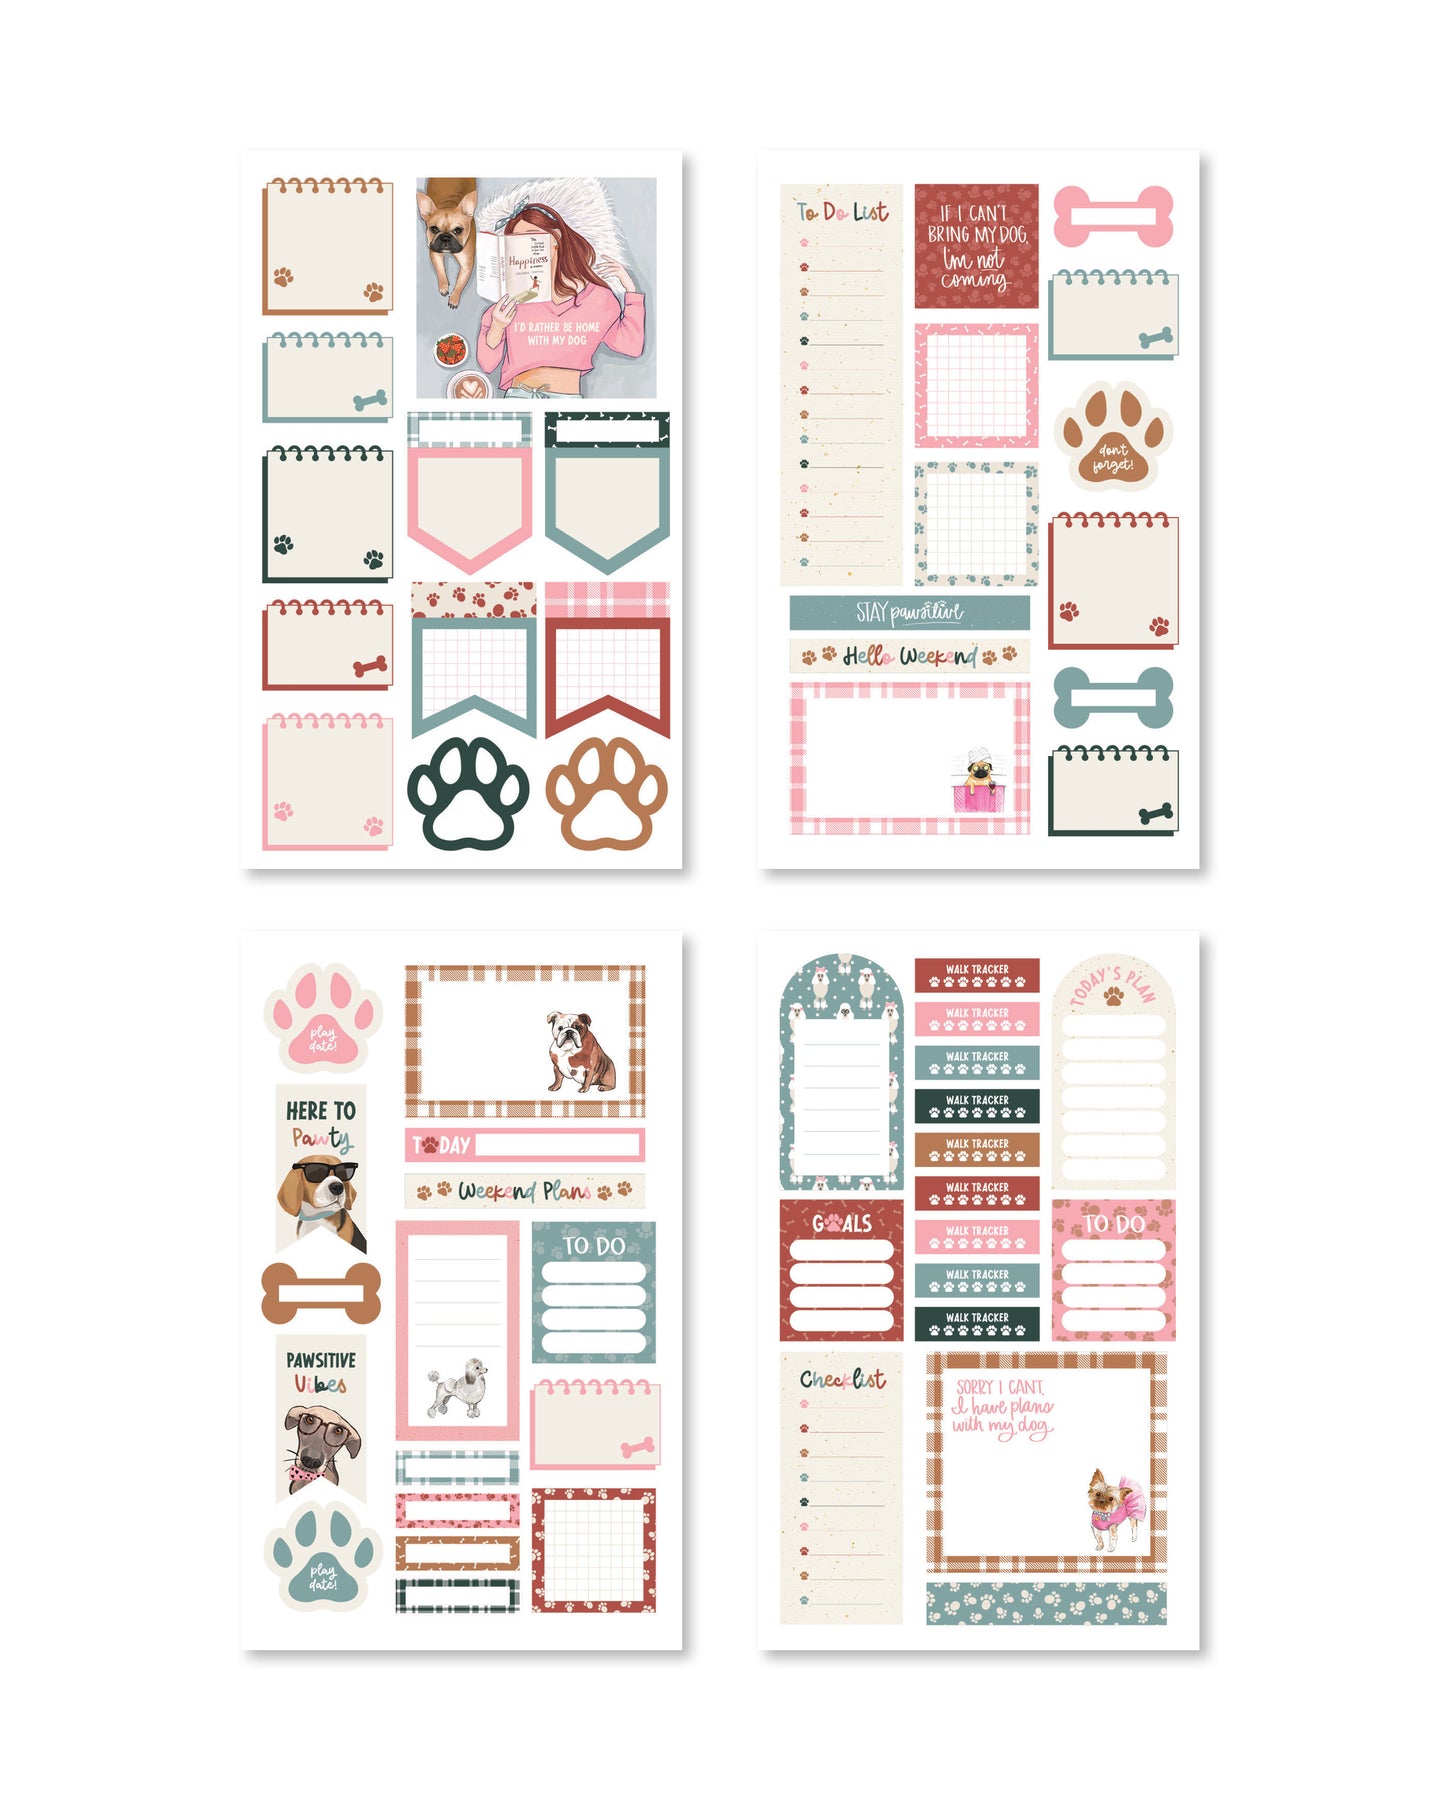 USING PET TAPE TO MAKE A DECORATIVE PLANNER SPREAD, RONGRONG STICKER BOOK  & TAPE